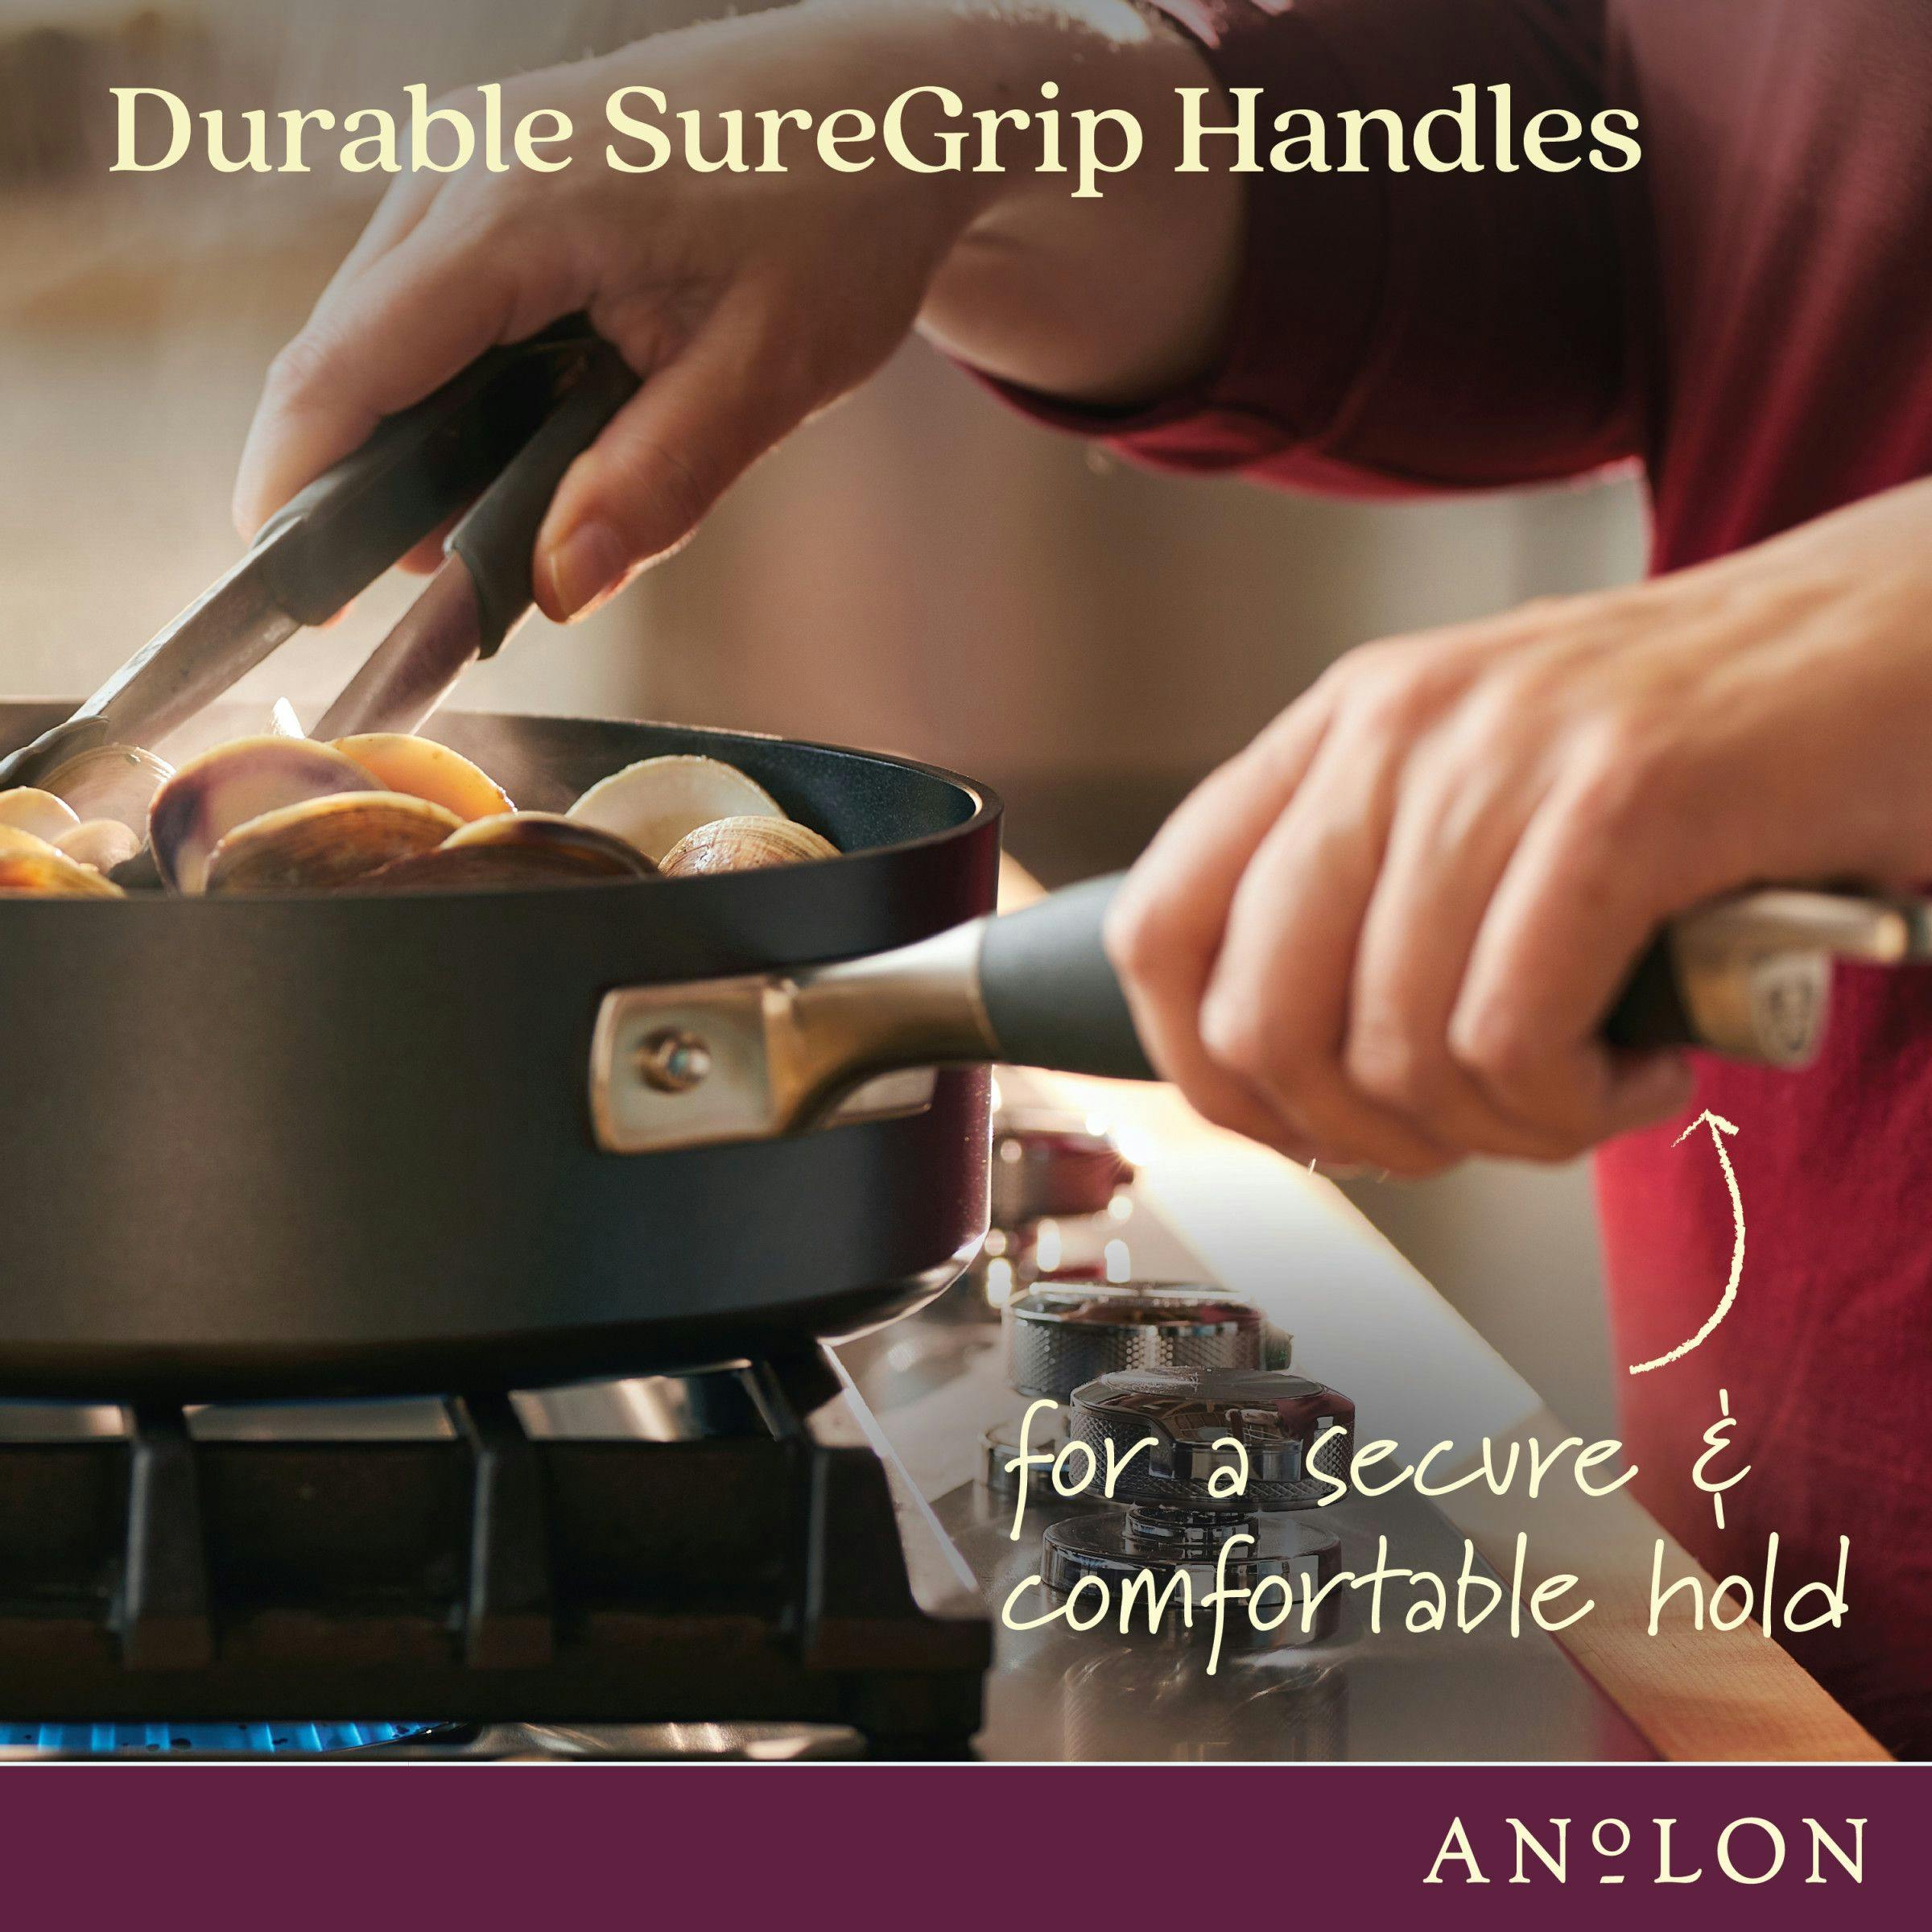 Anolon Advanced Home Hard-Anodized Nonstick Deep Frying Pan with Lid, 12-Inch, Bronze